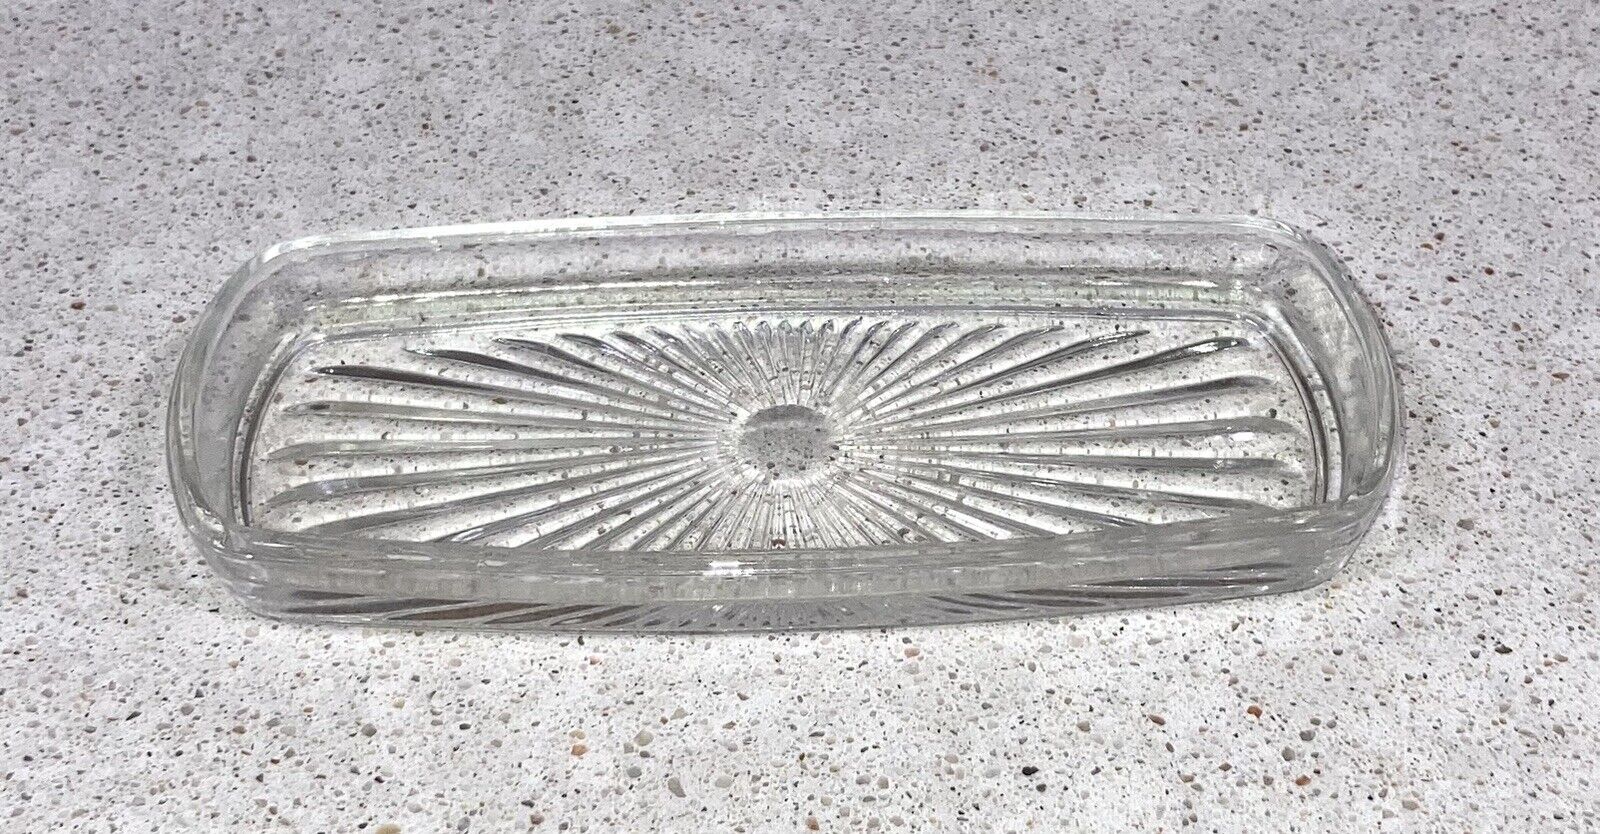 VINTAGE SUNBURST PATTERN BUTTER DISH GLASS REPLACEMENT TRAY 6 INCH